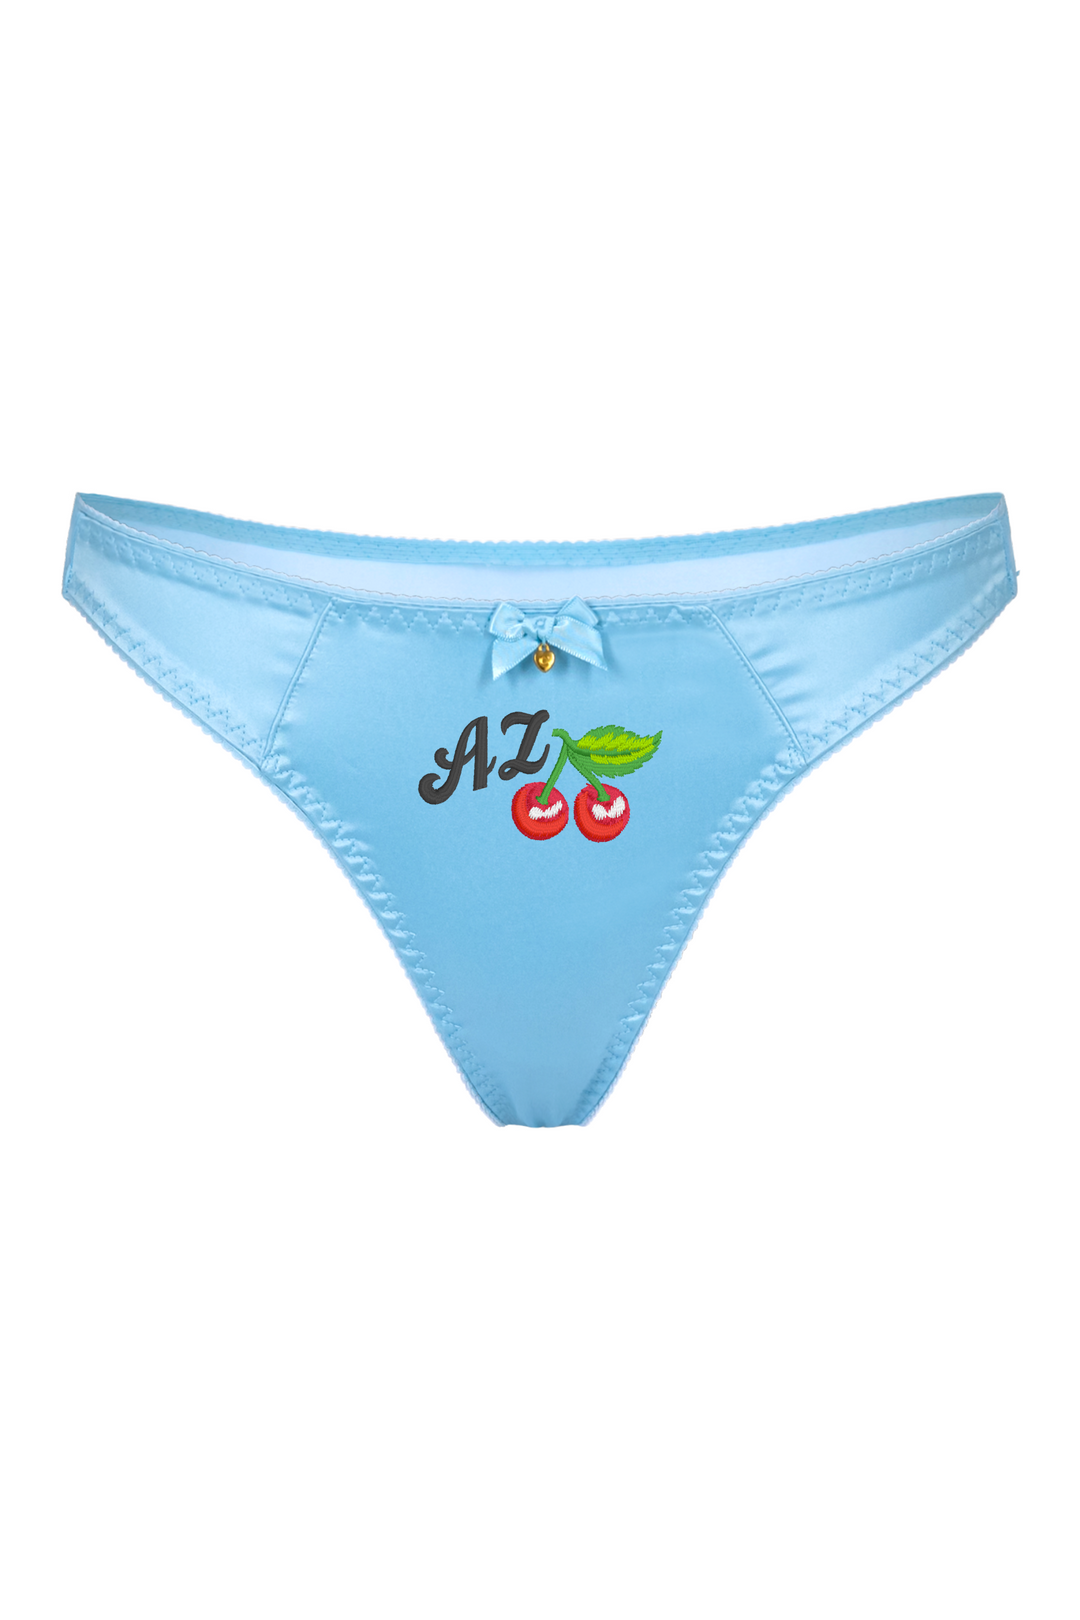 Cherry Bomb: Personalised Knickers